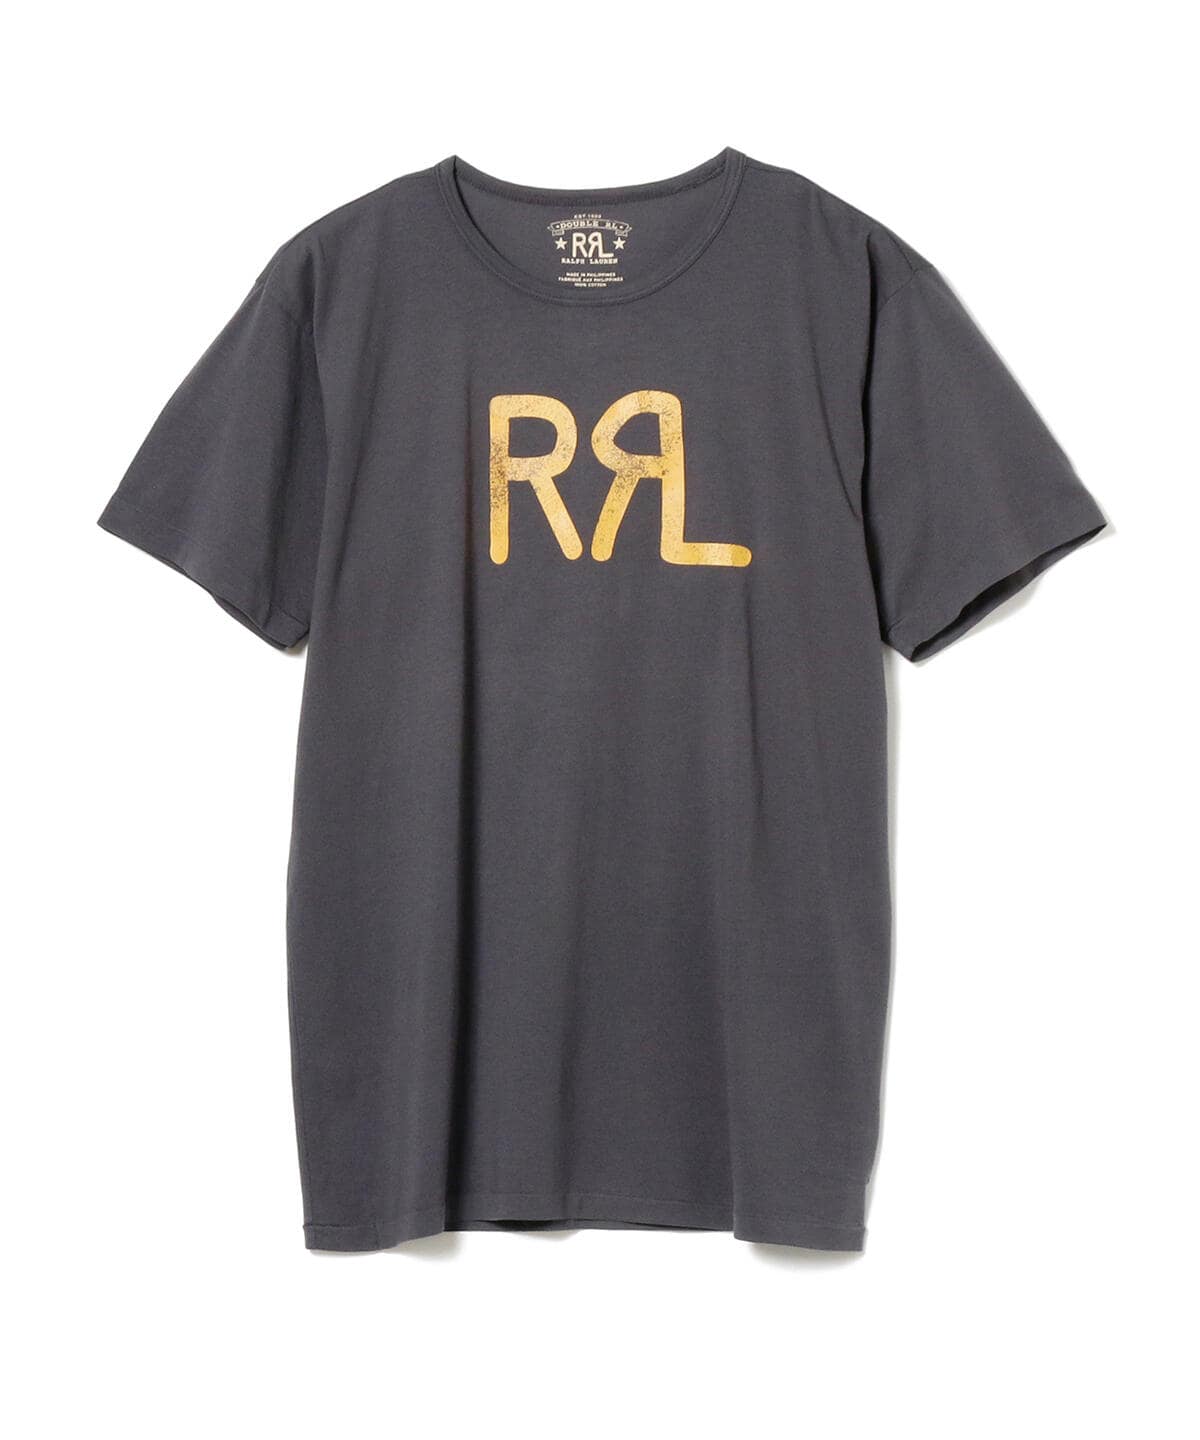 RRL jersey graphic t shirt